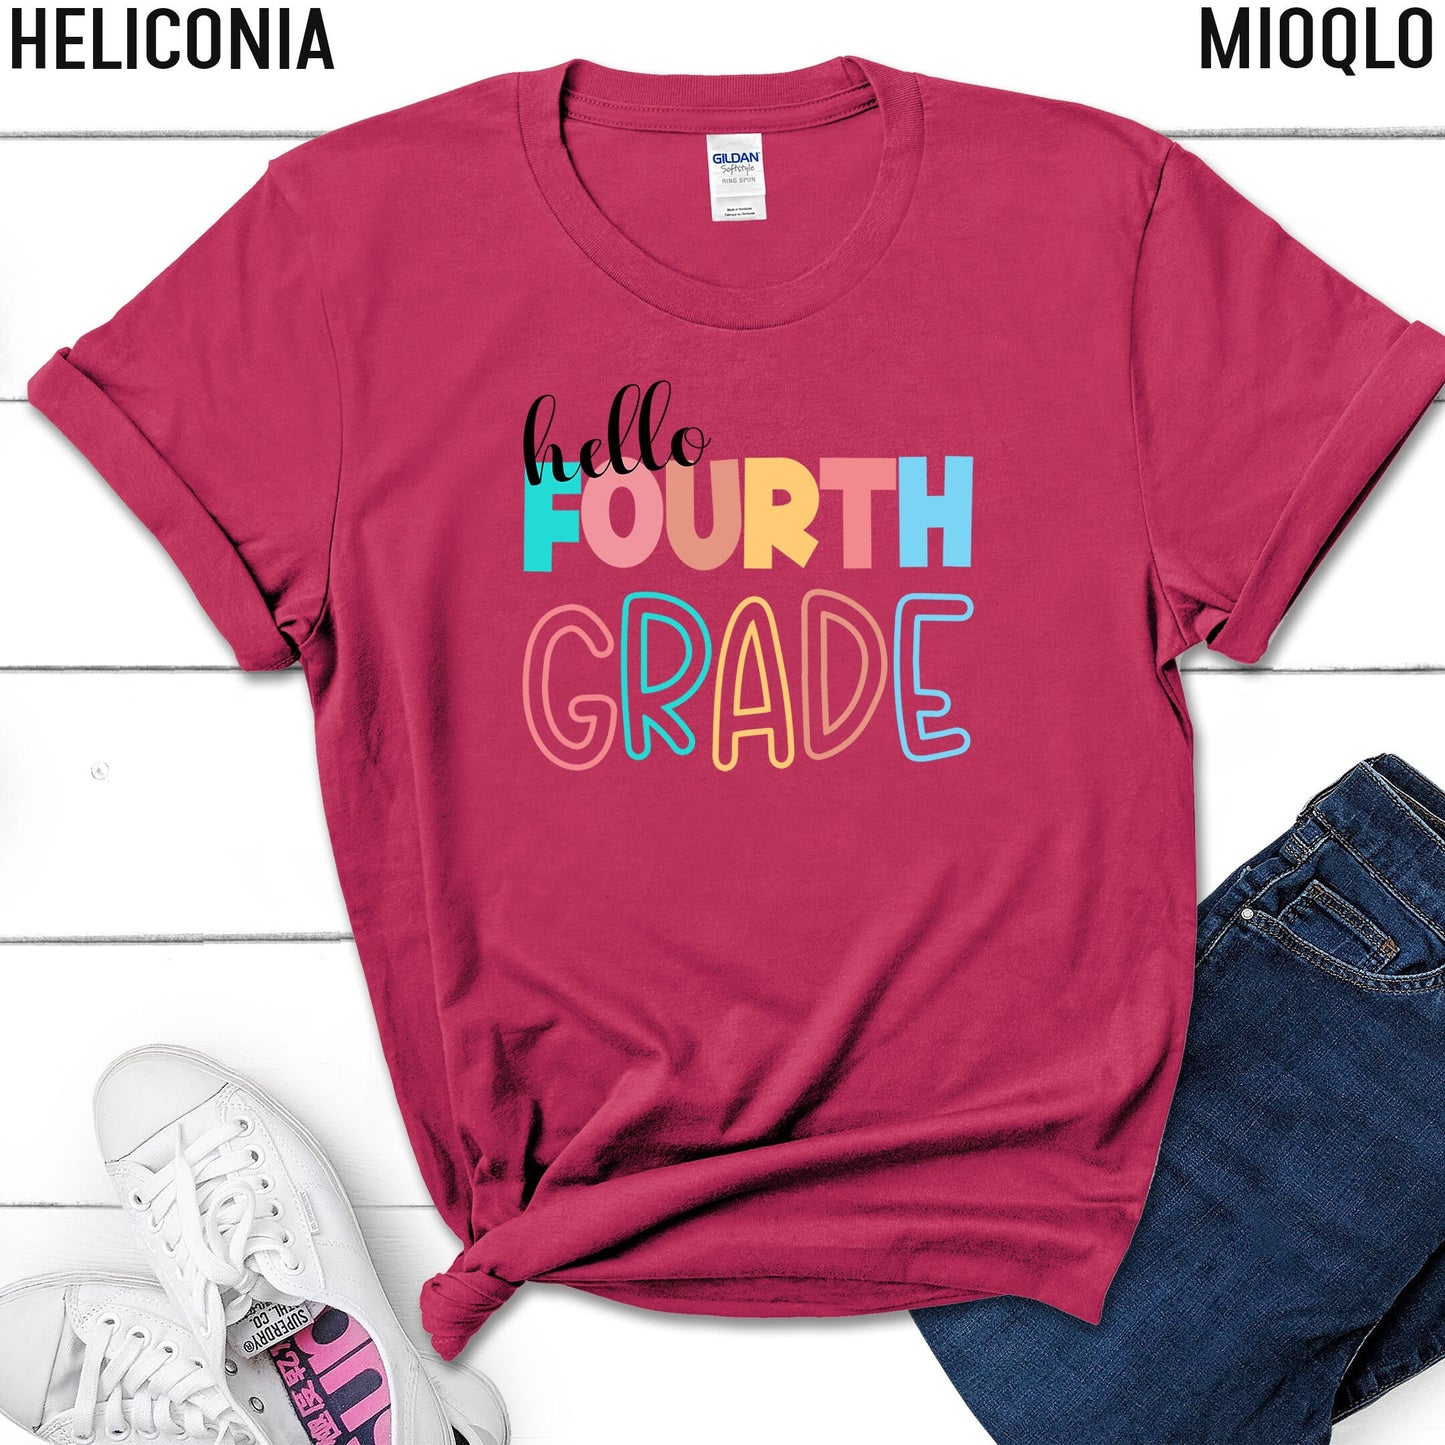 Second Grade Outfit, Hello Custom Grade, Hello 1st Grade Shirt, First Day Of School Tee, Back To School Tee, 3rd, 4th, 2nd Grade School Tee